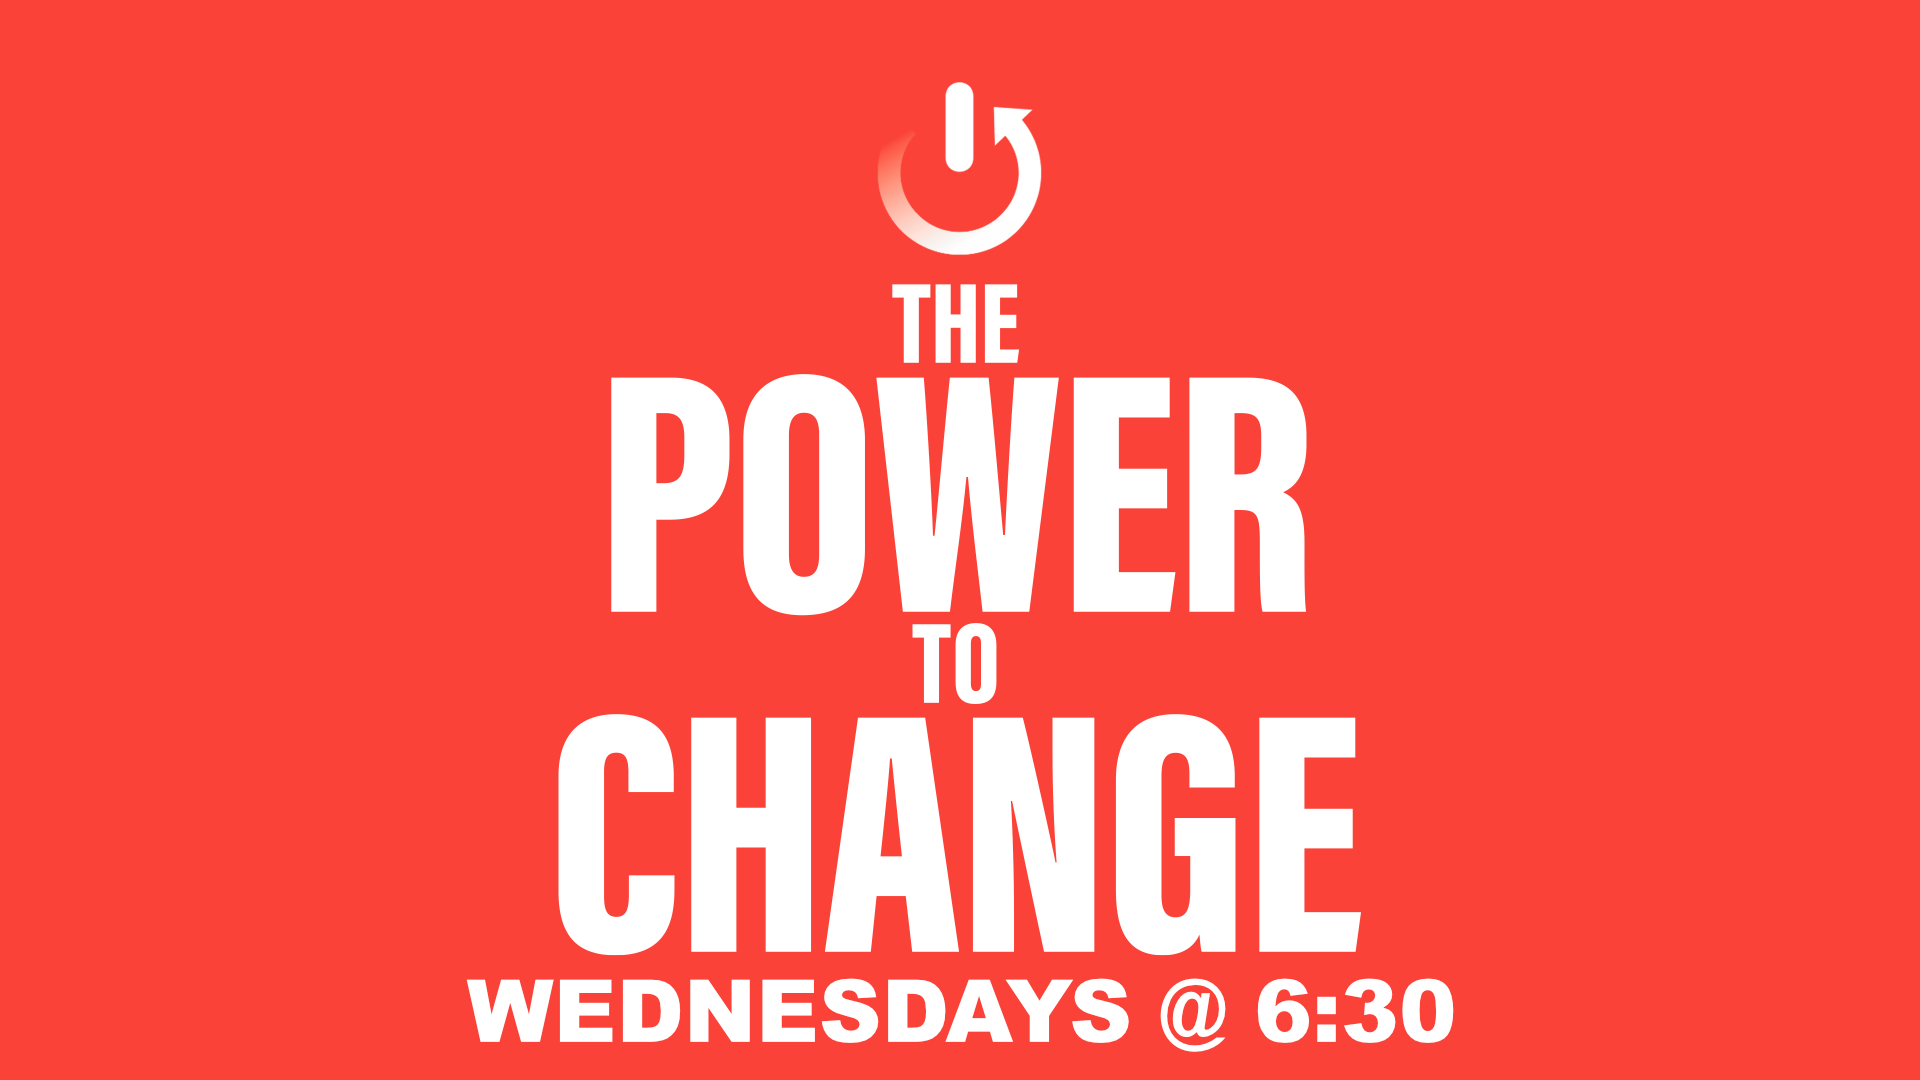 POWER TO CHANGE wednesdays.png